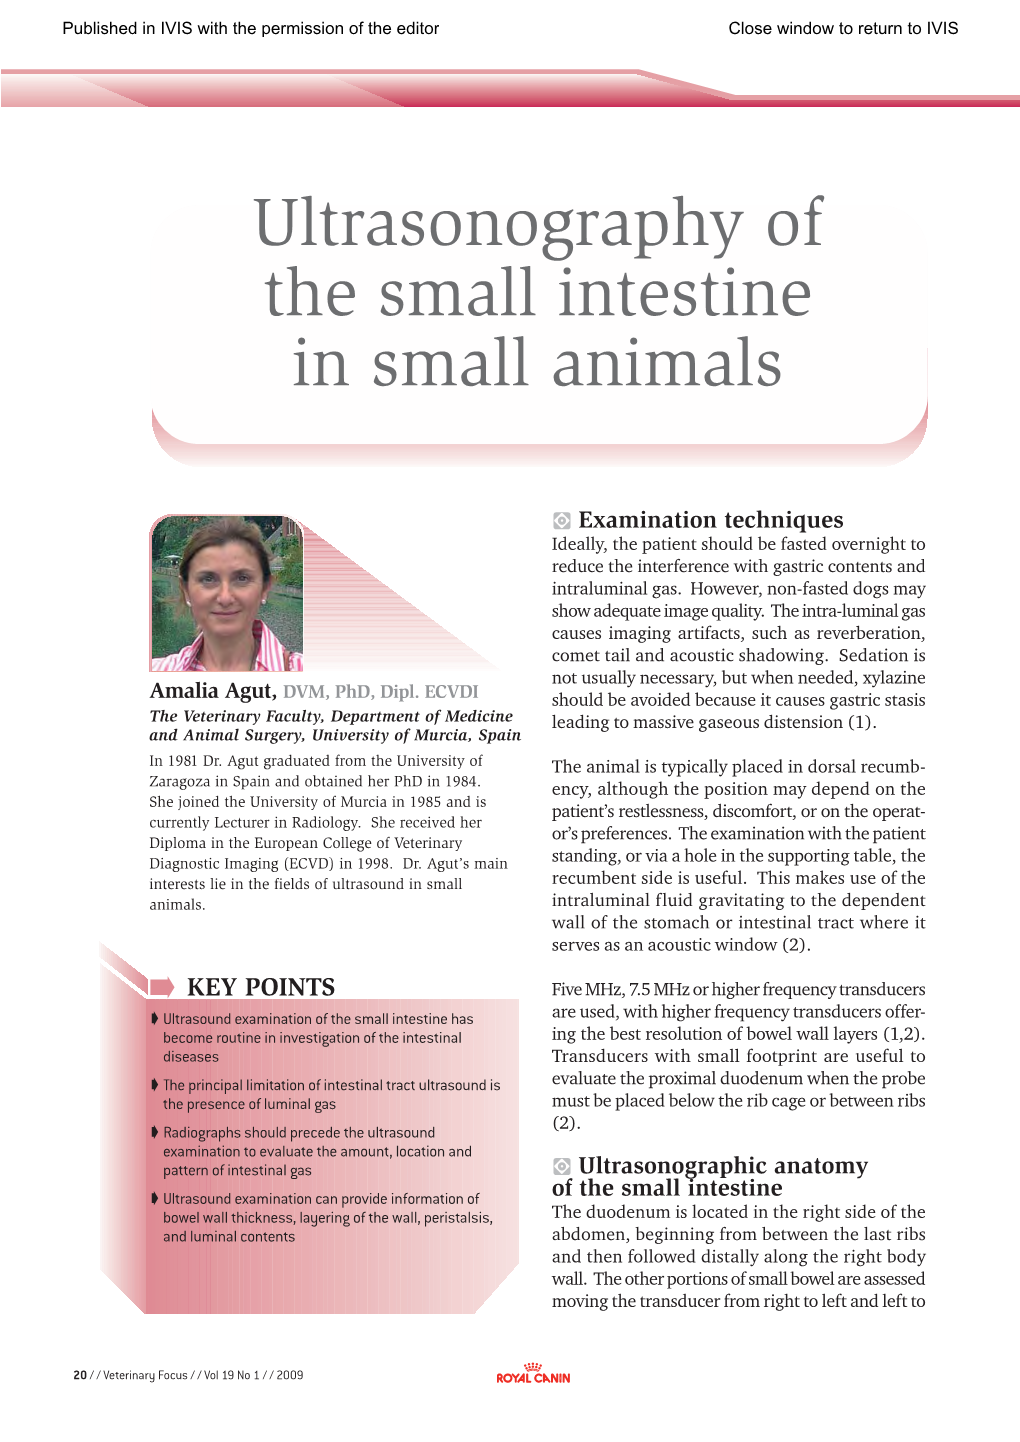 Ultrasonography of the Small Intestine in Small Animals. In